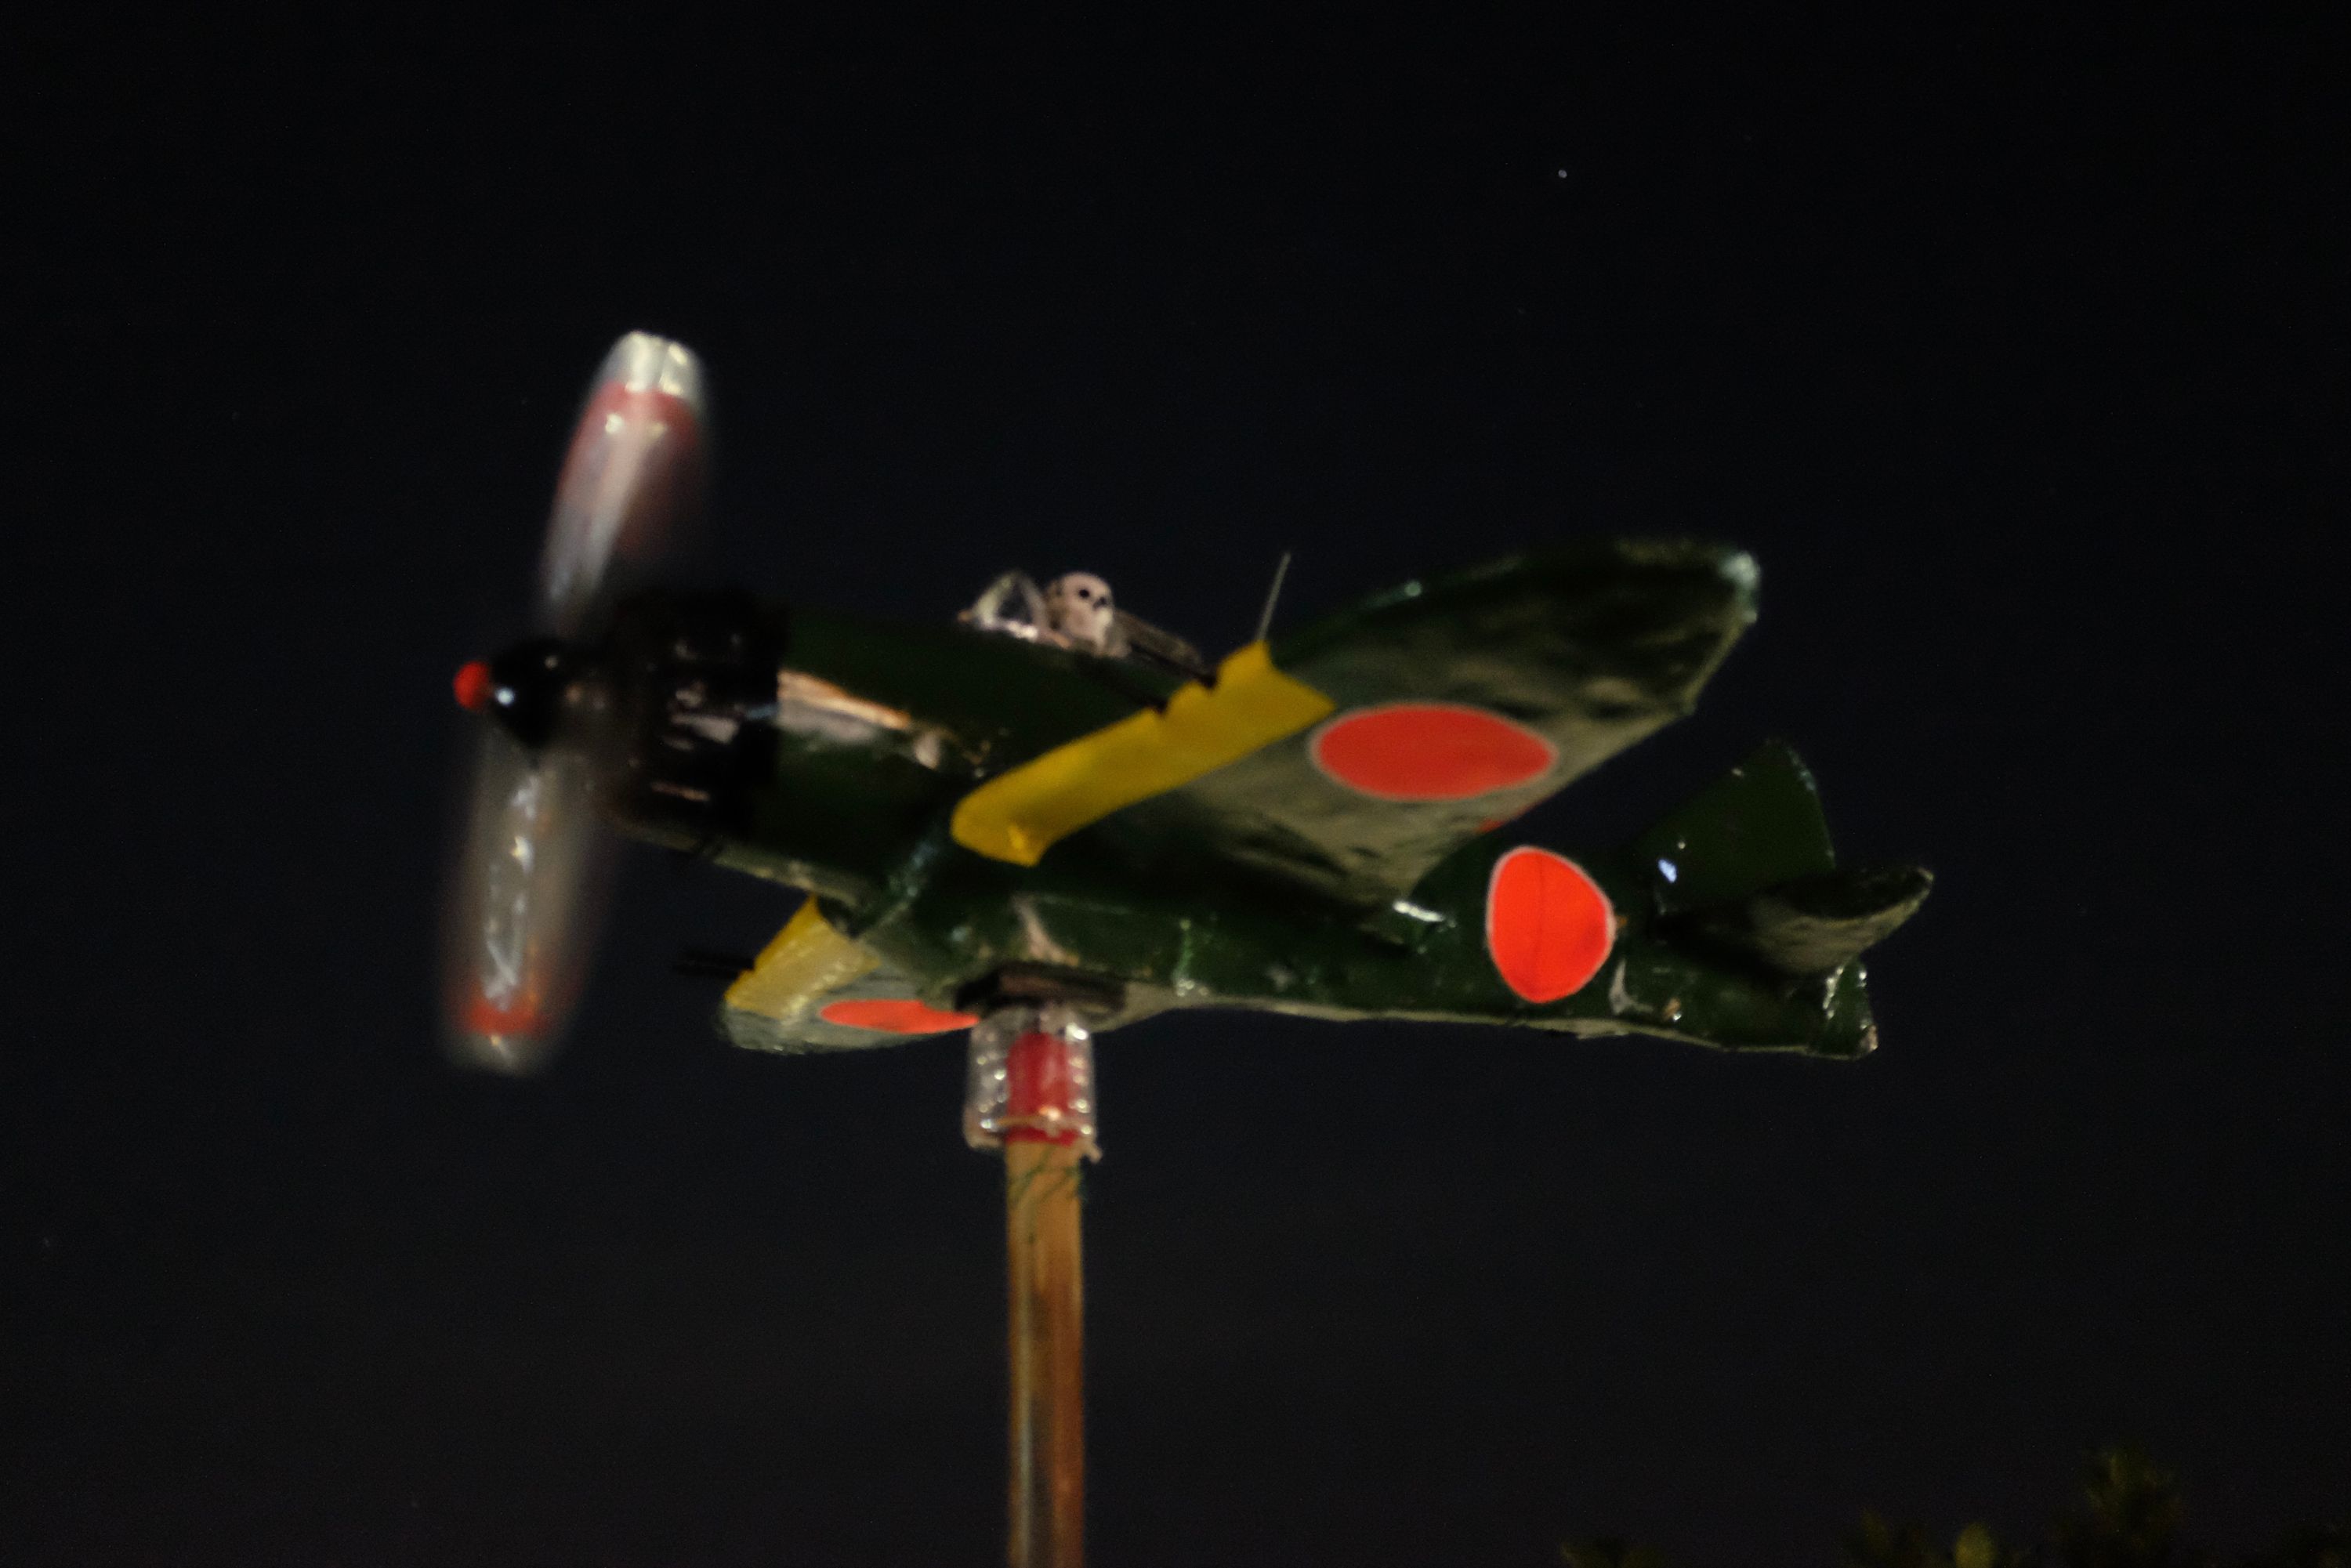 The model of a World War II-era Mitsubishi Zero fighter plane appears to fly across the night sky.